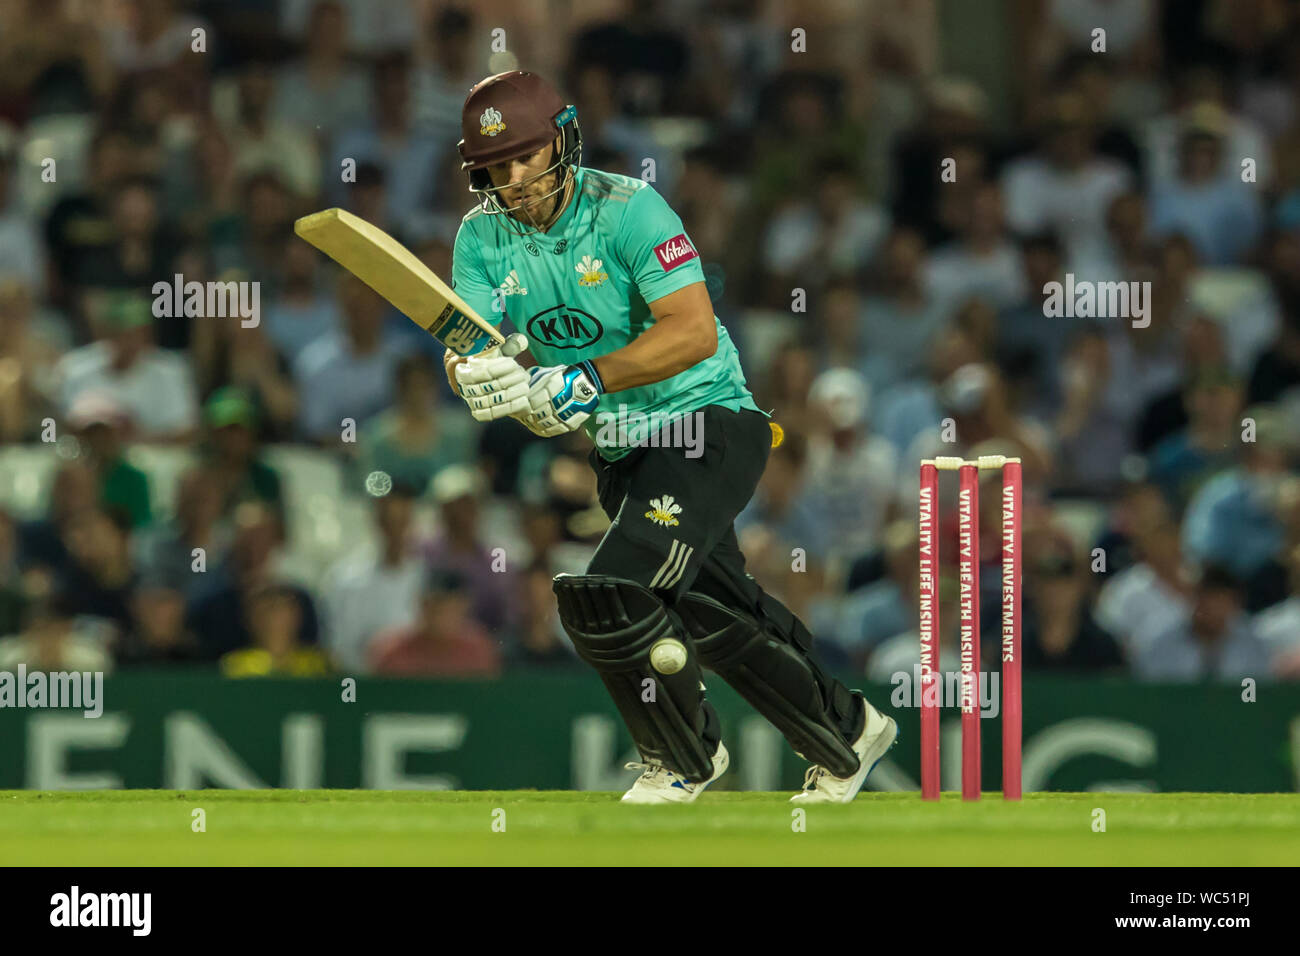 London, UK. 27 August, 2019. Aaron Finch batting for Surrey against Somerset in the Vitality T20 Blast match at the Kia Oval. David Rowe/Alamy Live News Stock Photo